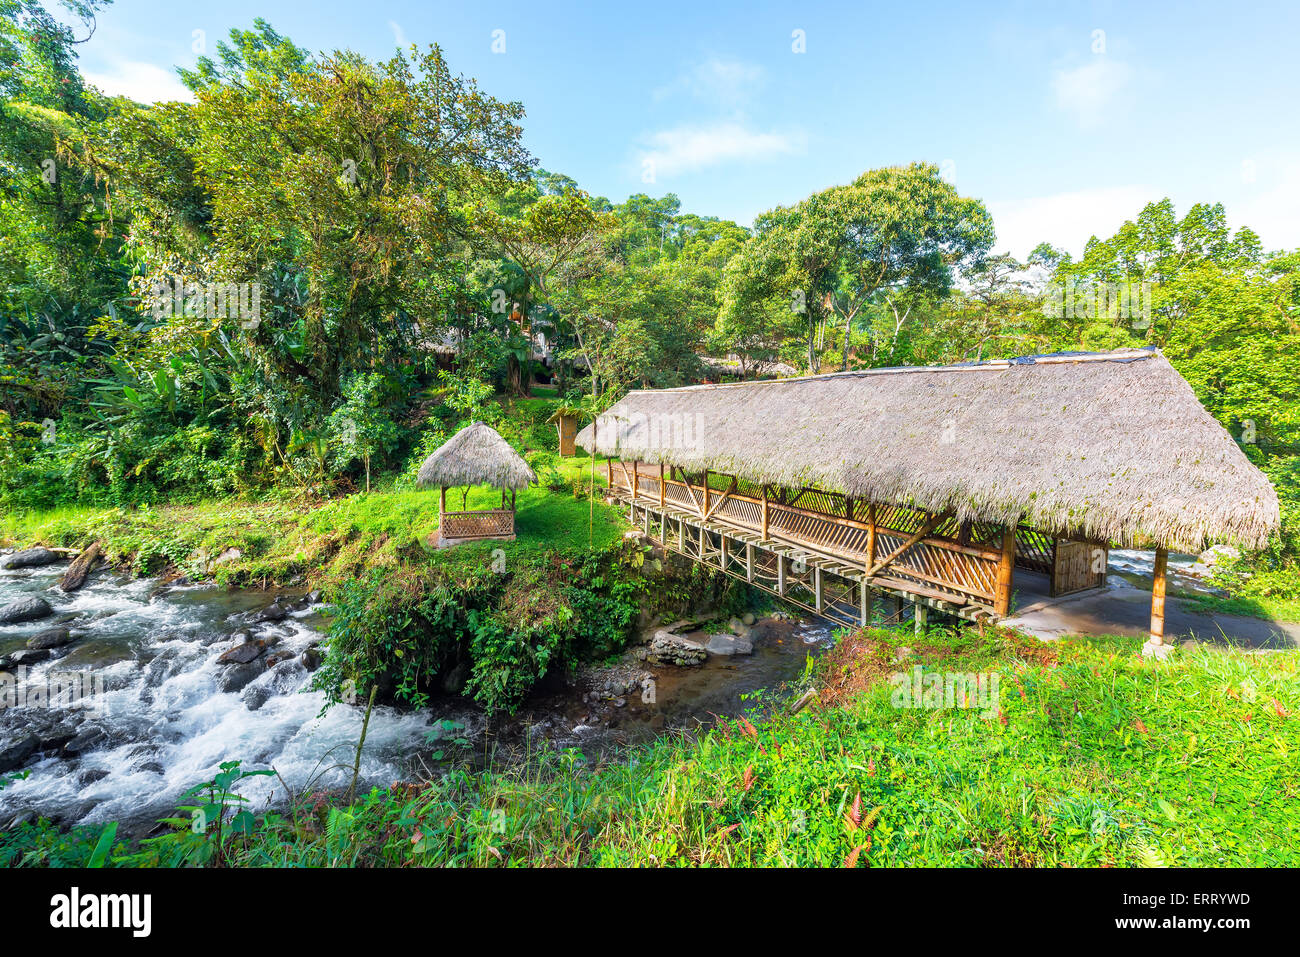 Rustic looking bridge with a thatch roof crossing a river in a cloud forest near Mindo, Ecuador Stock Photo